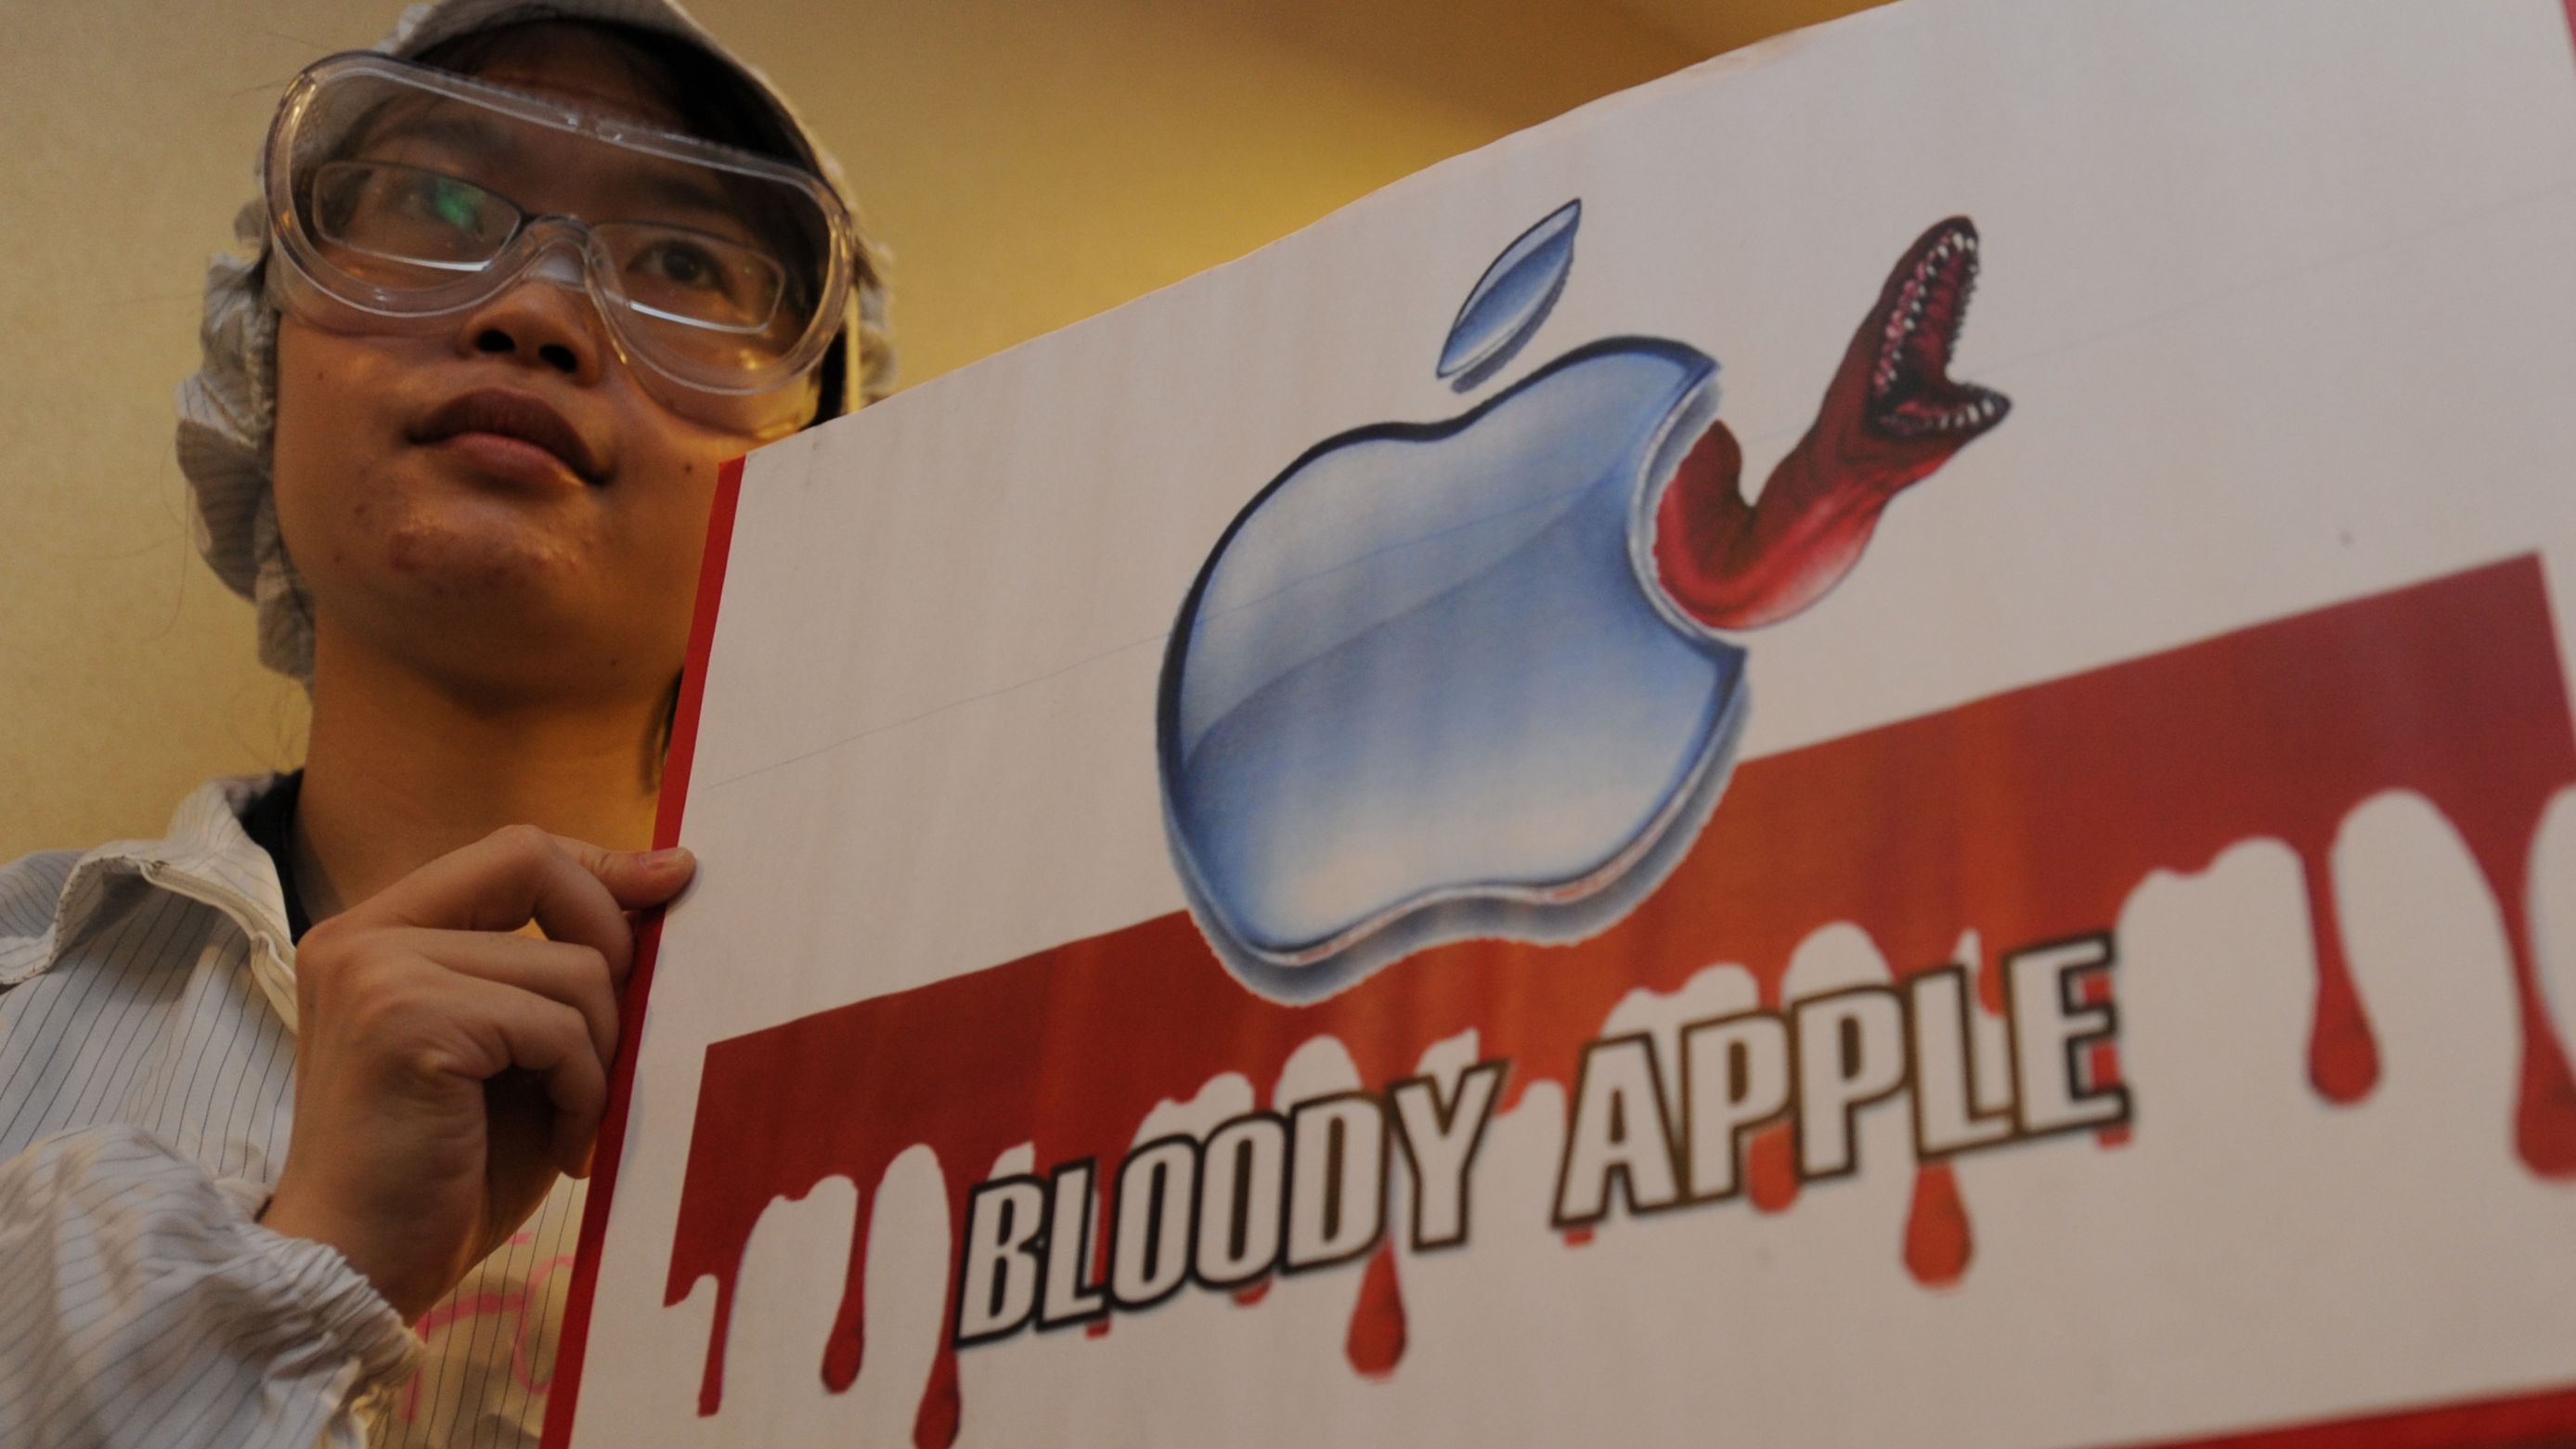 A protester takes part in a rally last year in Hong Kong against Foxconn, which makes Apple products.